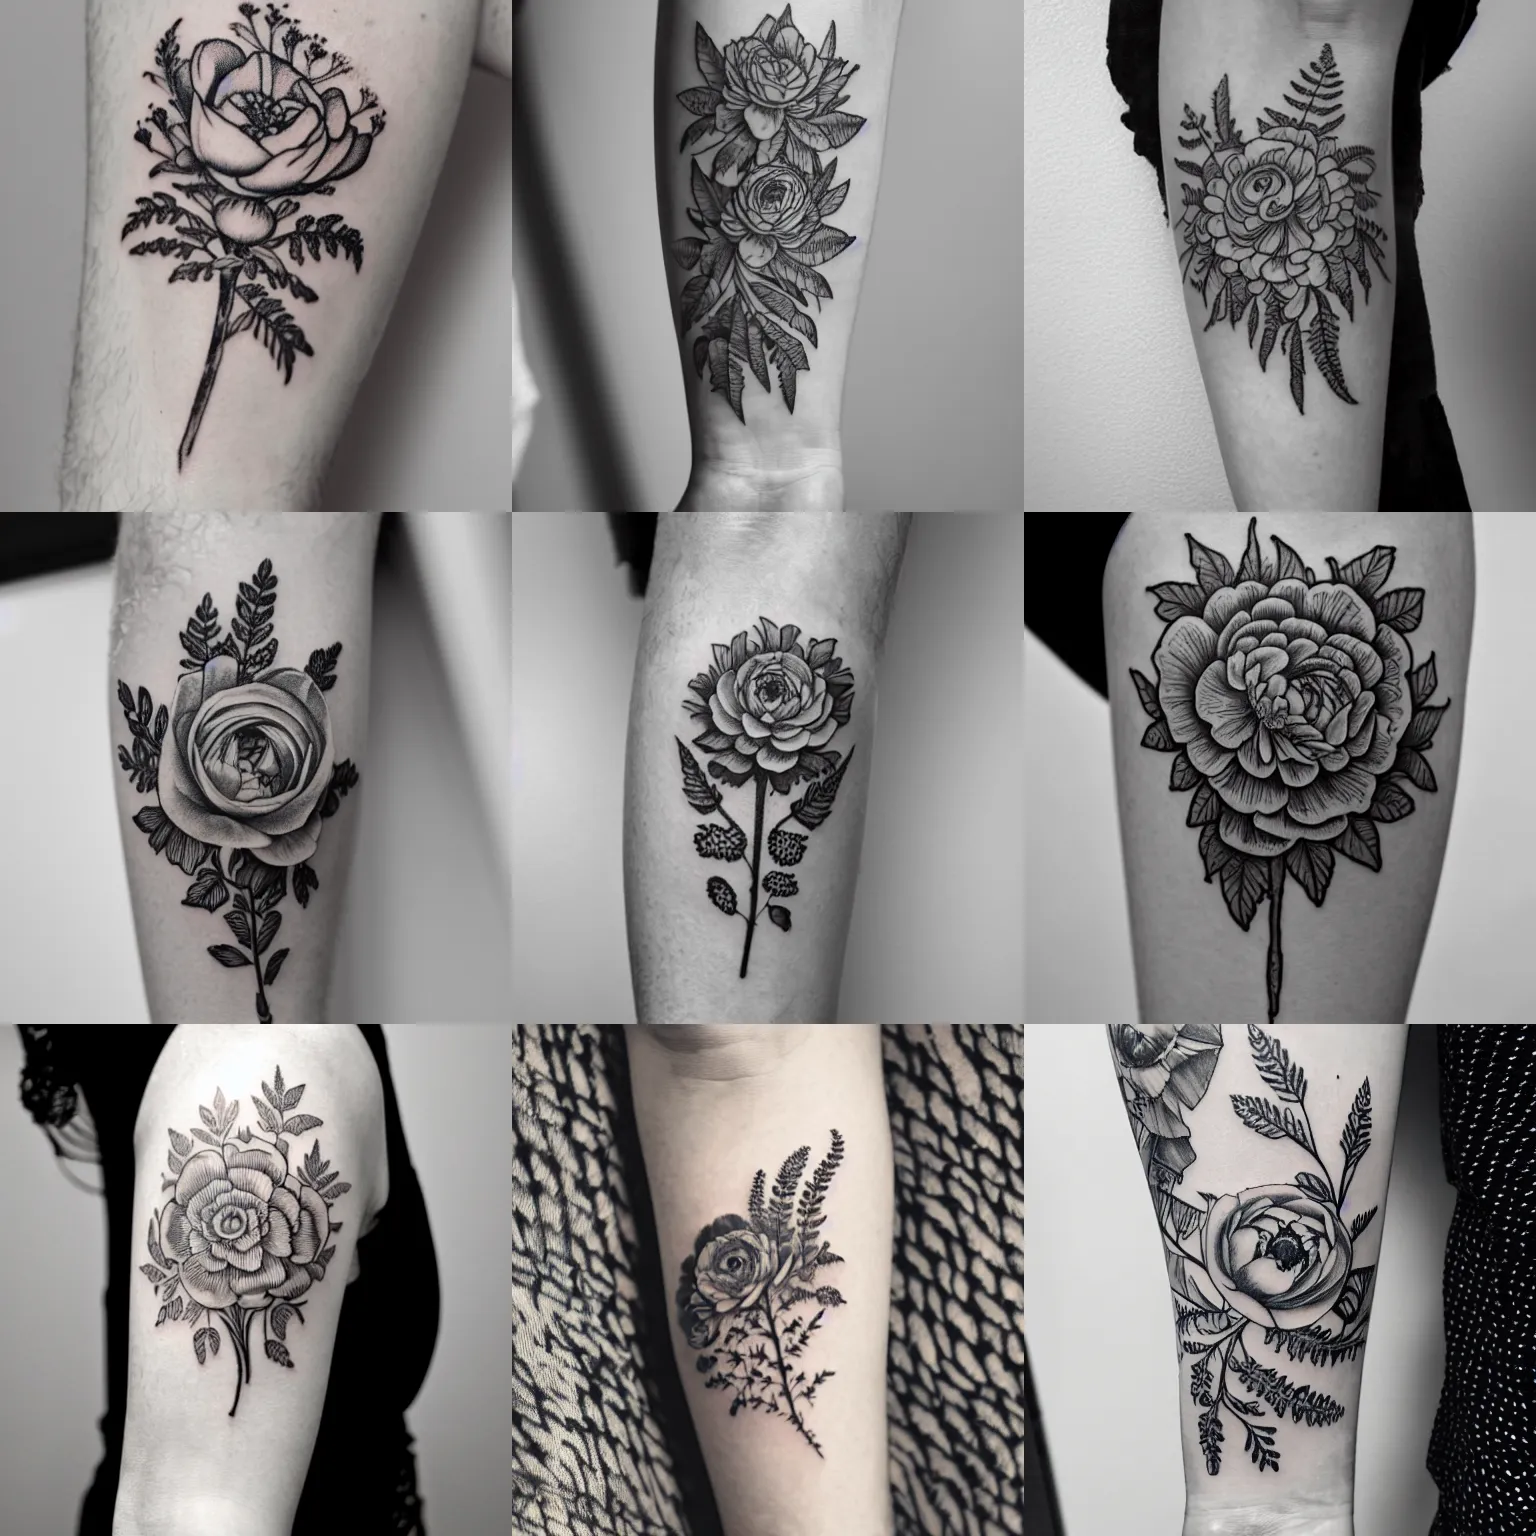 Prompt: A detailed monochrome tattoo of ranunculus flowers, queen Anne\'s lace flowers, and fern leaves